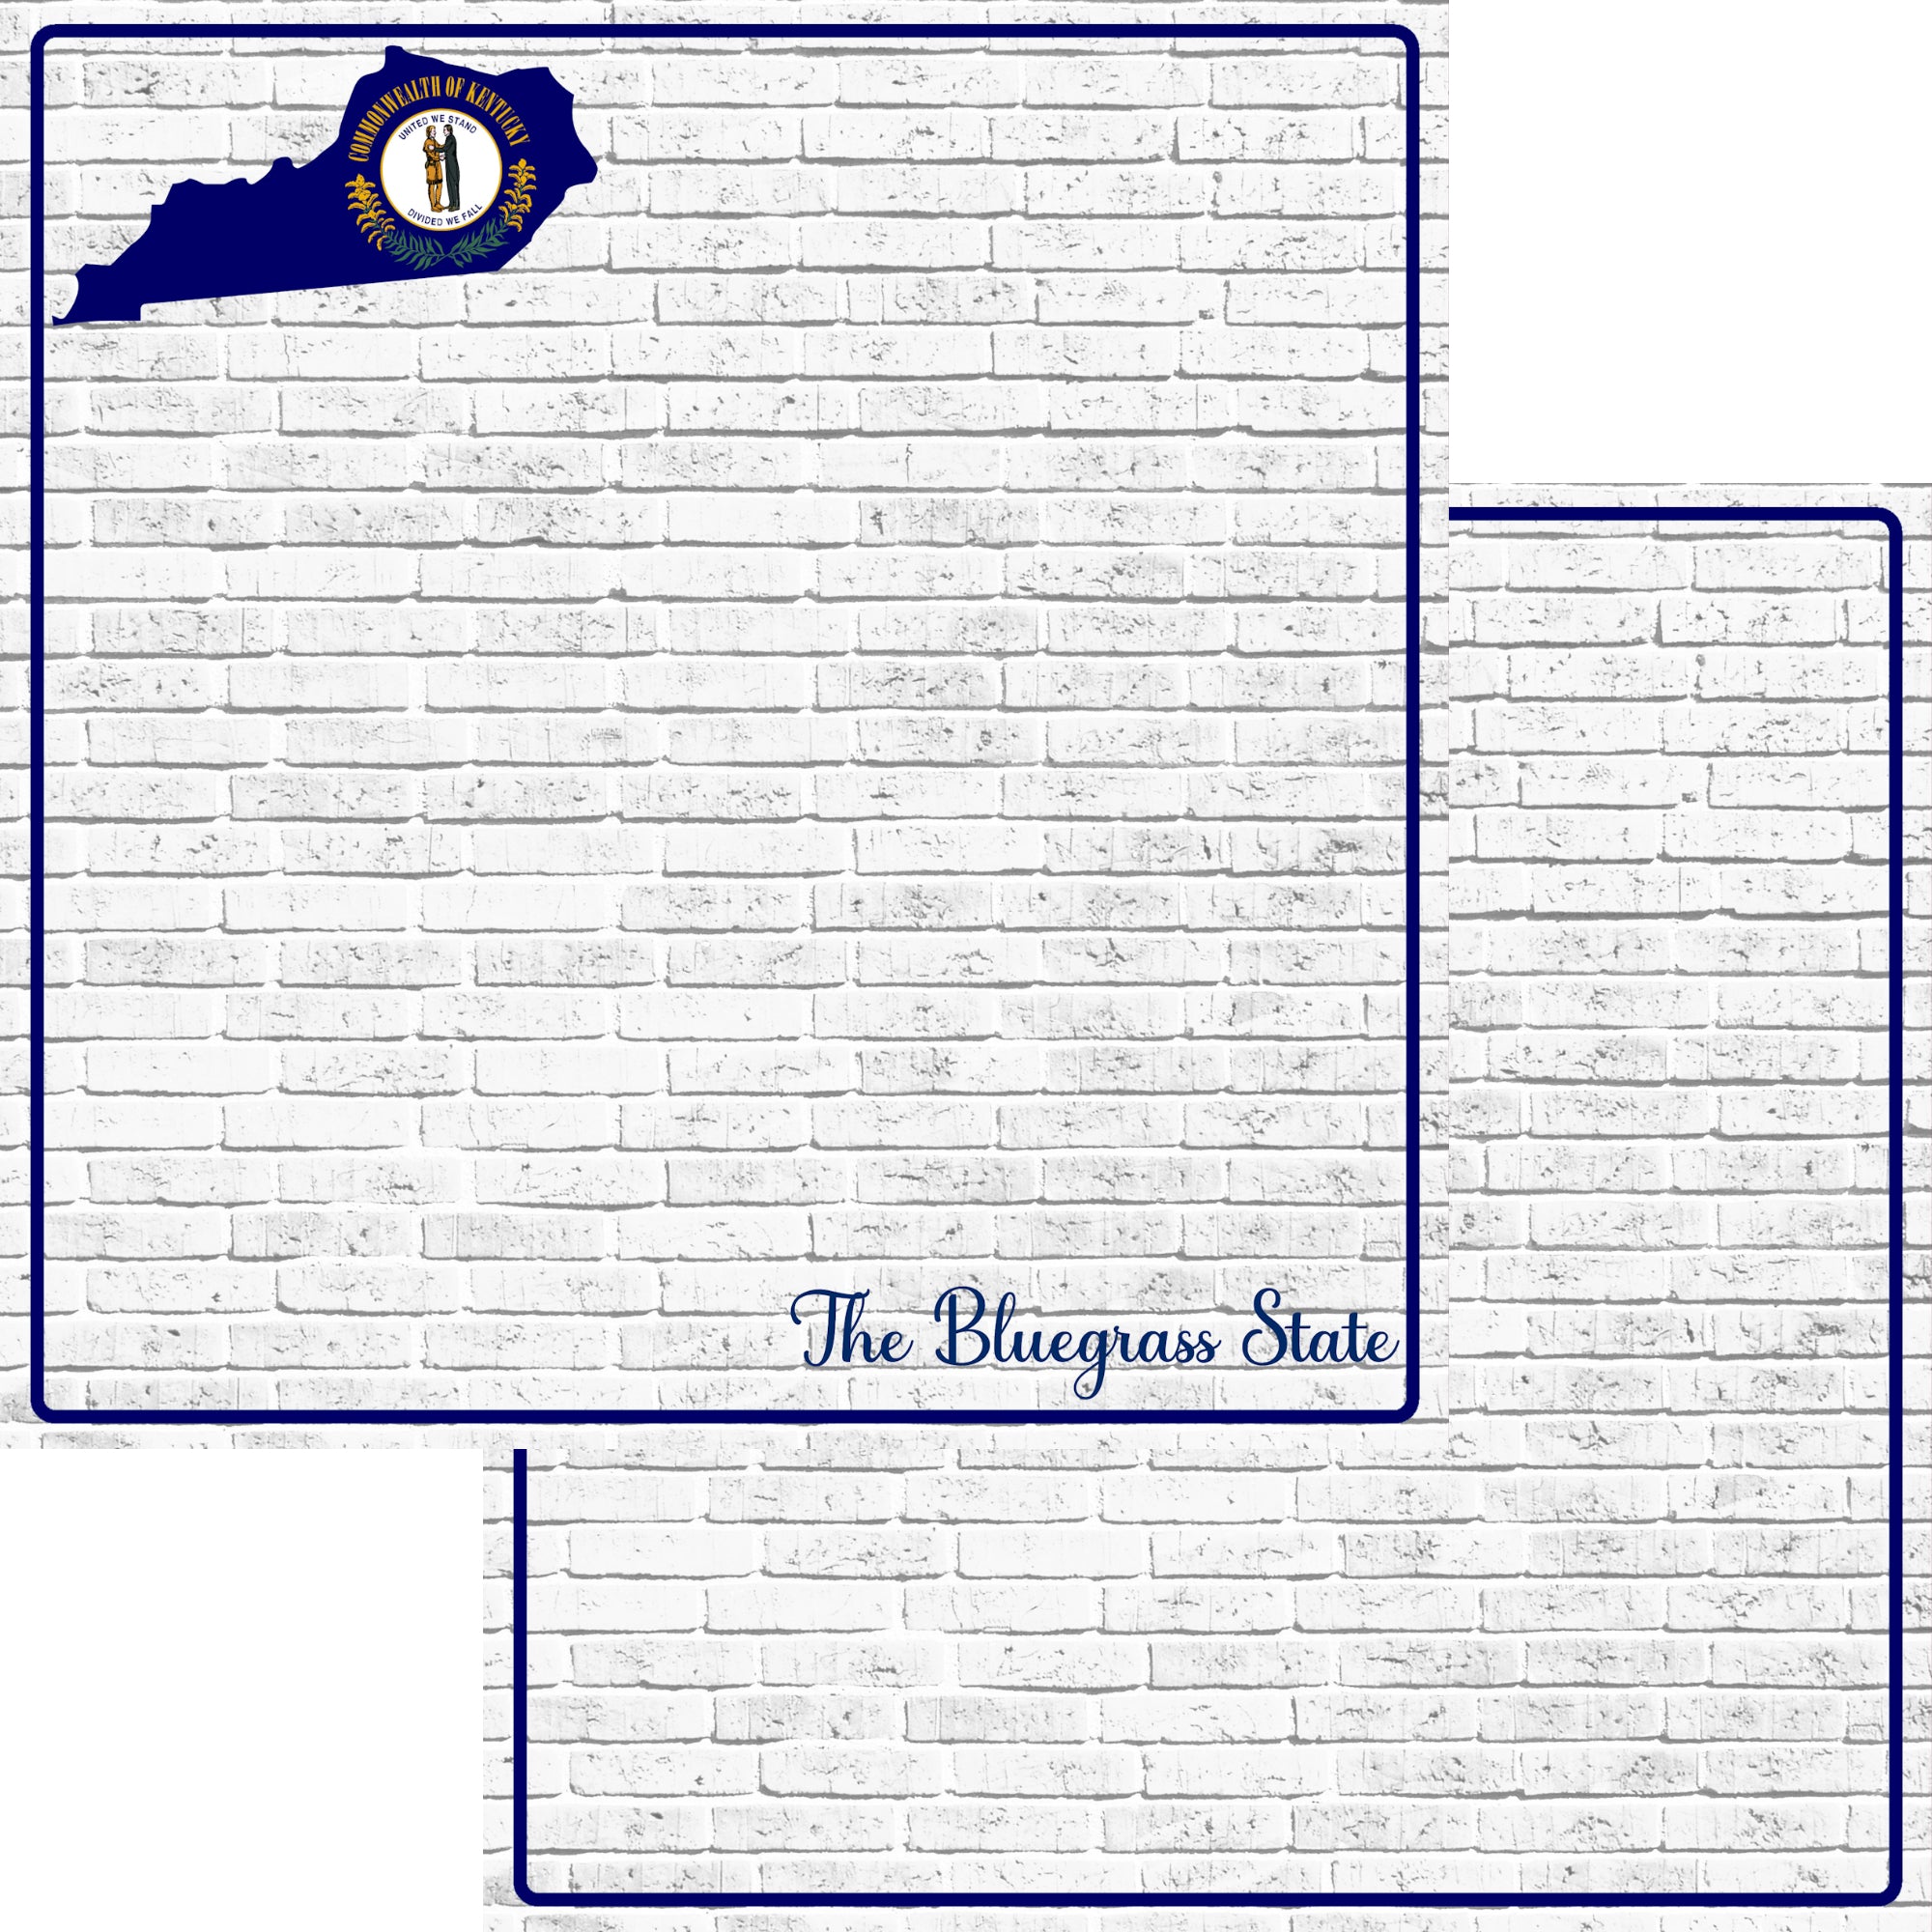 Fifty States Collection Kentucky 12 x 12 Double-Sided Scrapbook Paper by SSC Designs